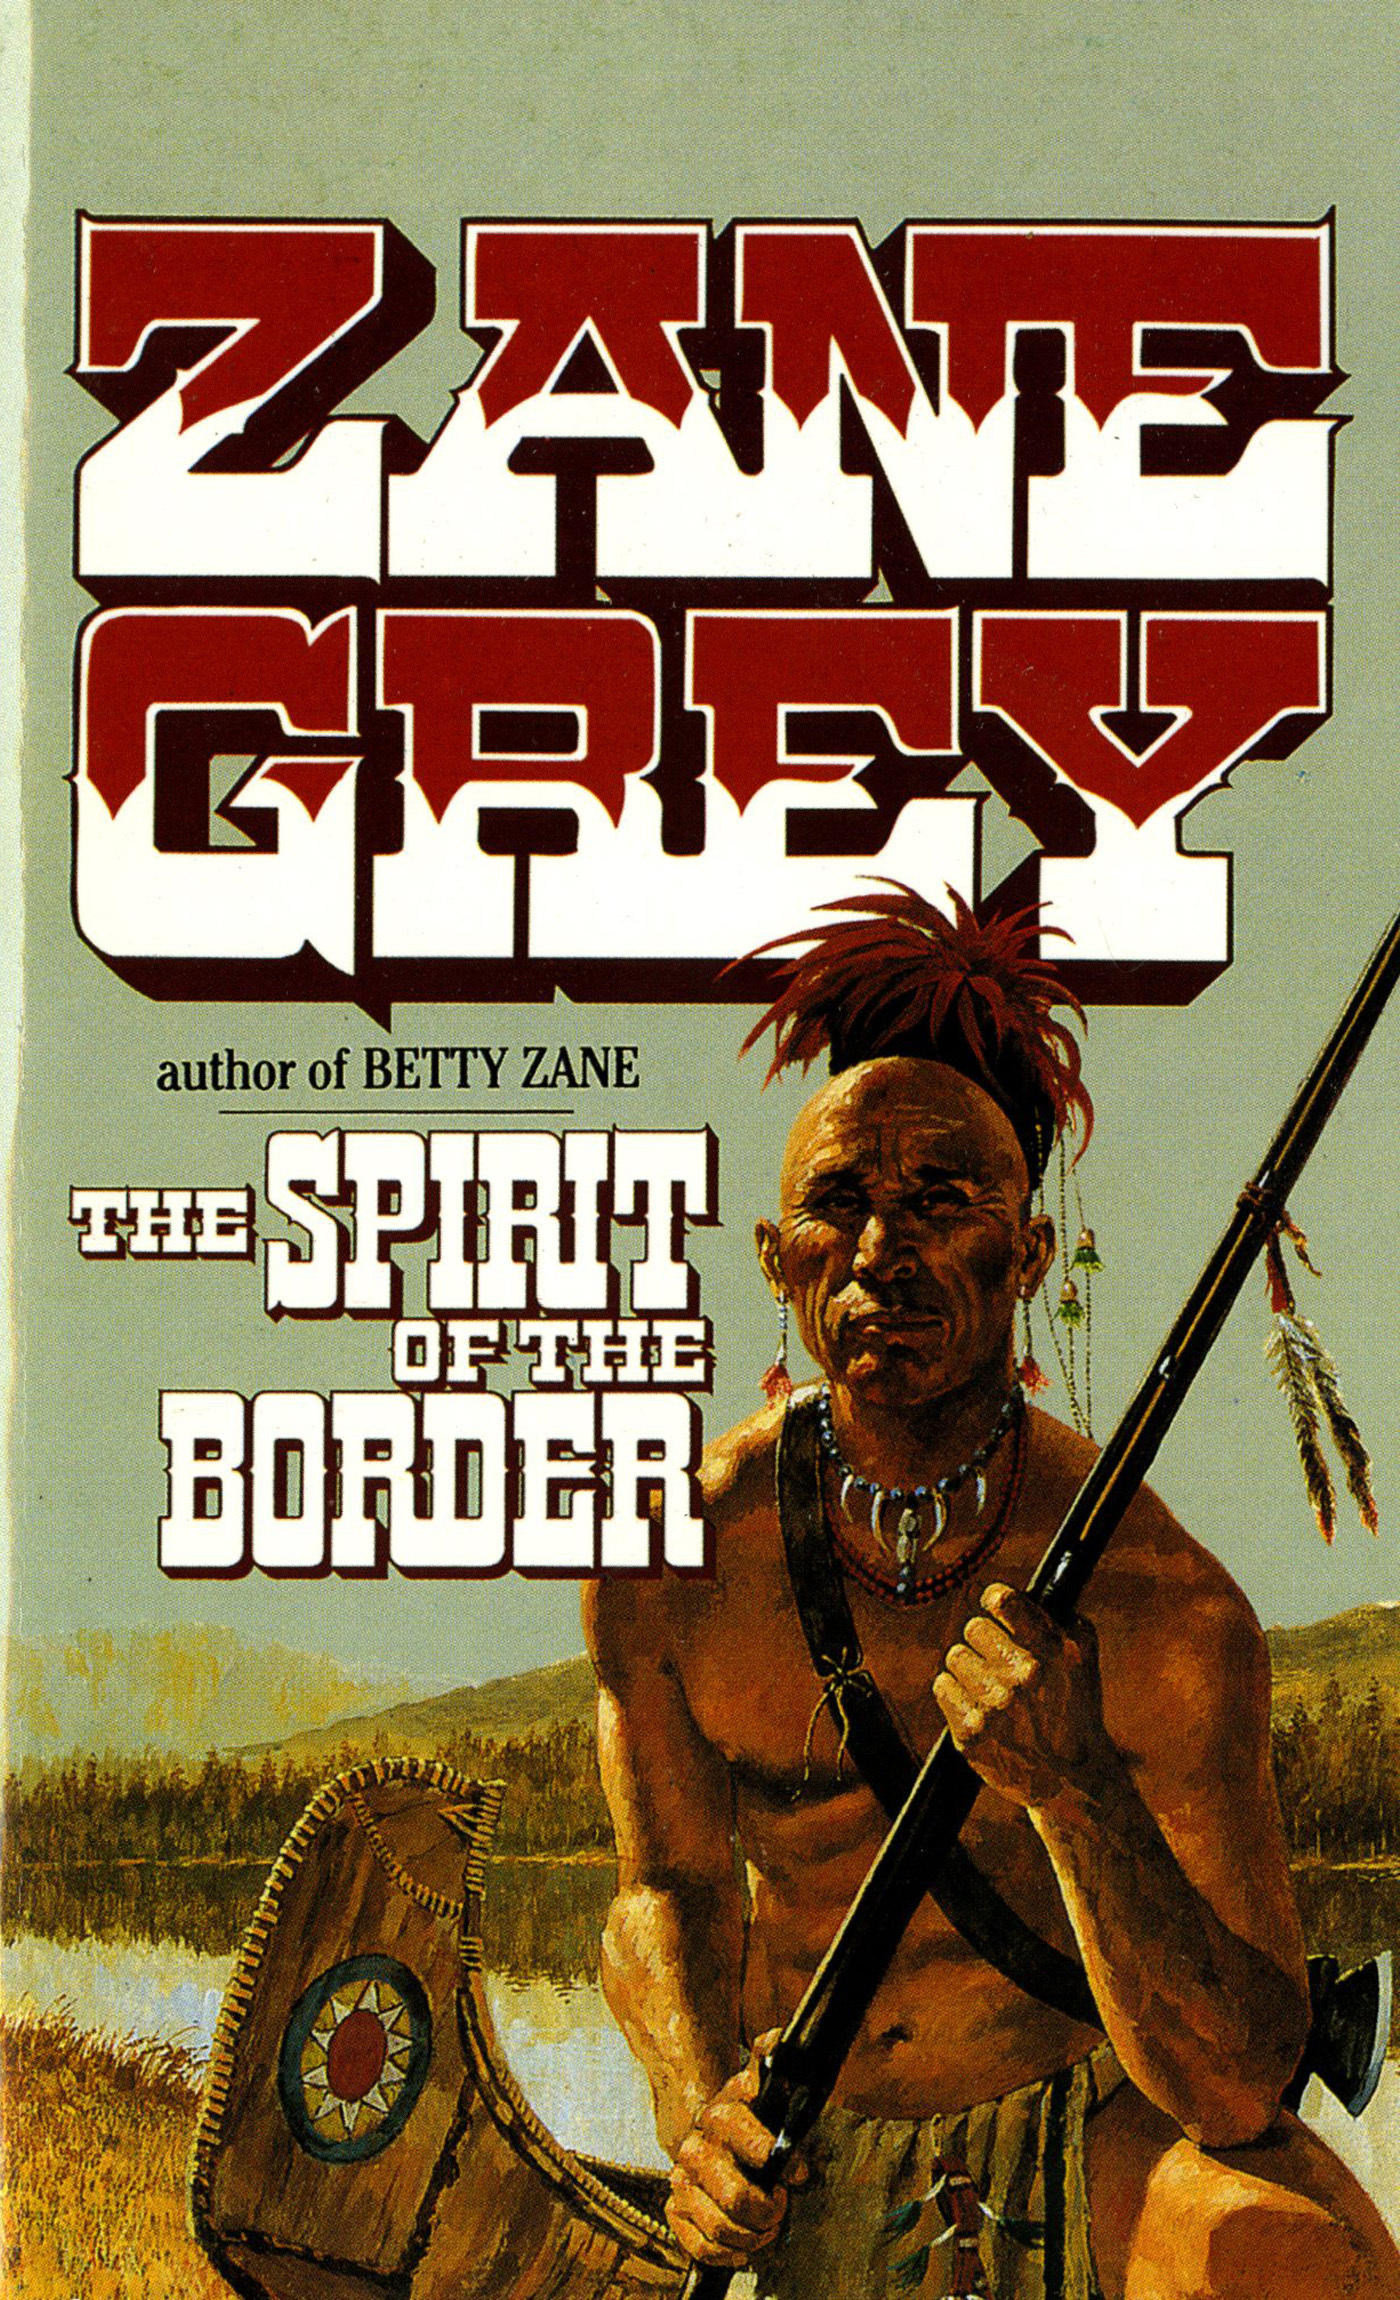 The Spirit of the Border : Stories of the Ohio Frontier by Zane Grey